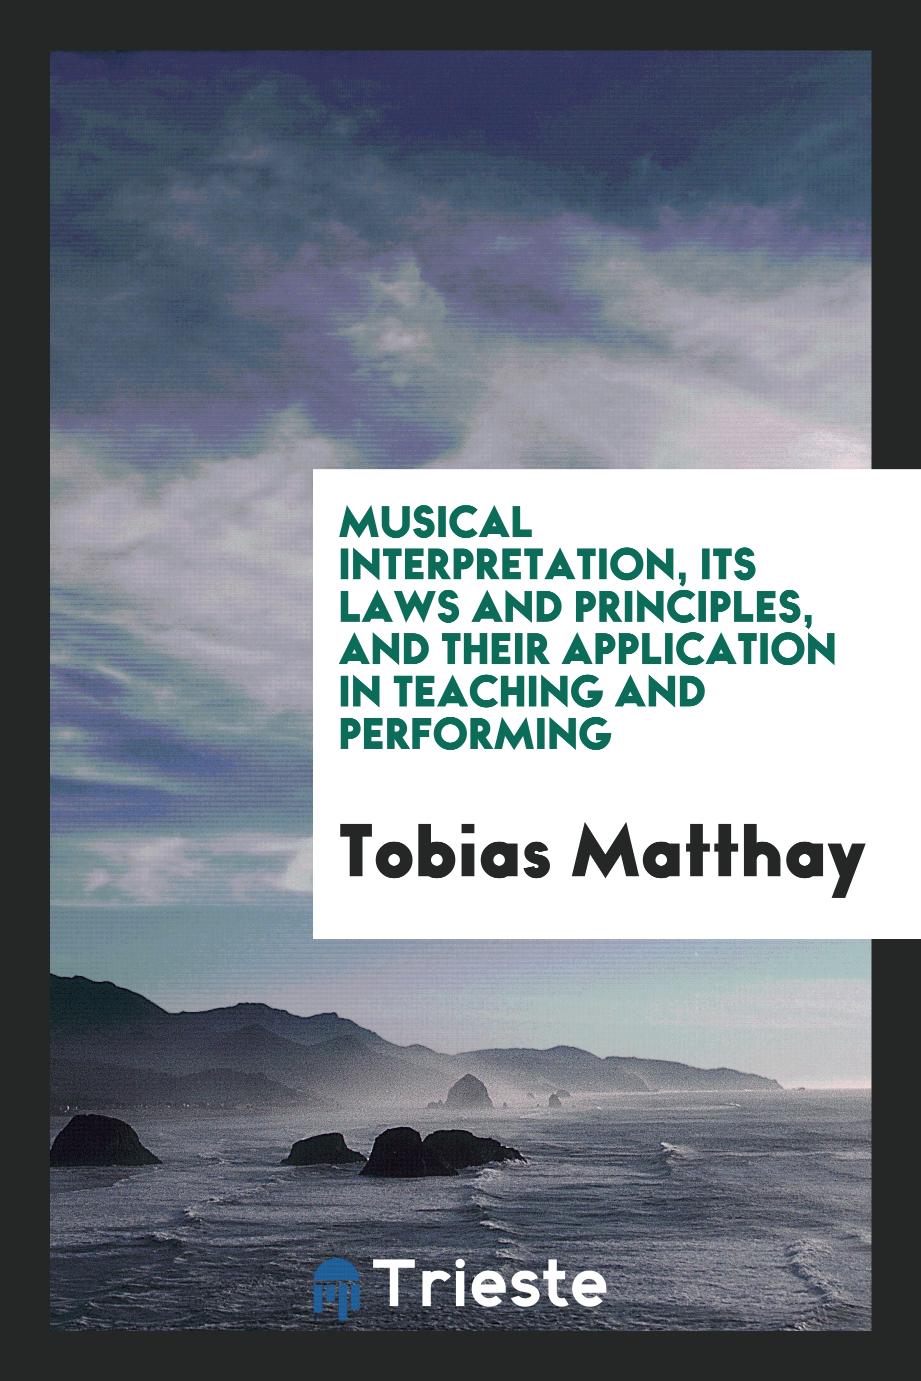 Tobias Matthay - Musical Interpretation, Its Laws and Principles, and Their Application in Teaching and Performing